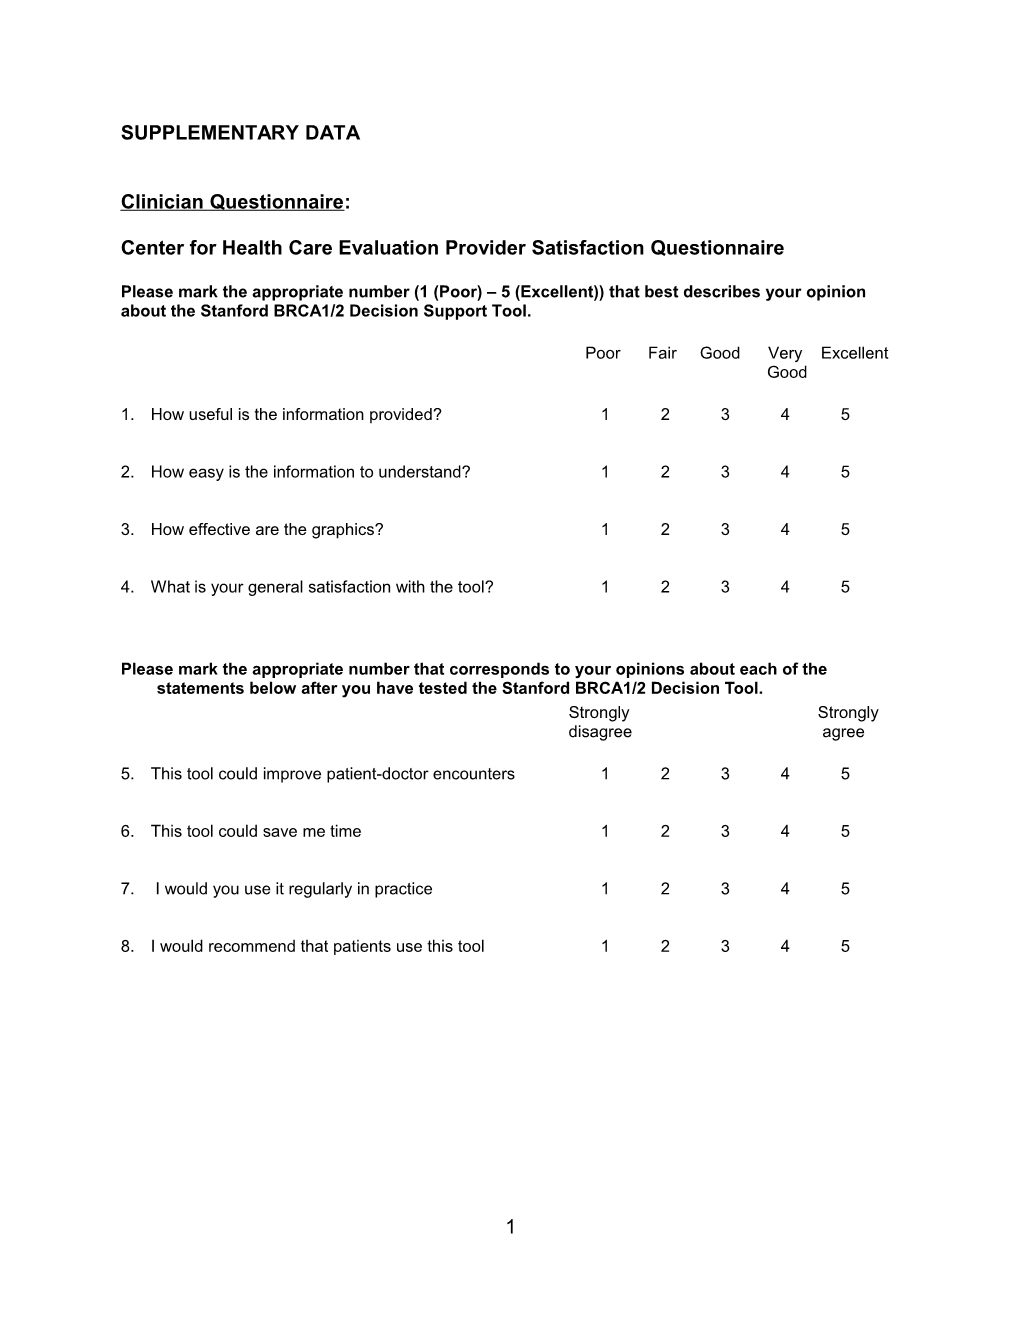 Center for Health Care Evaluation Provider Satisfaction Questionnaire